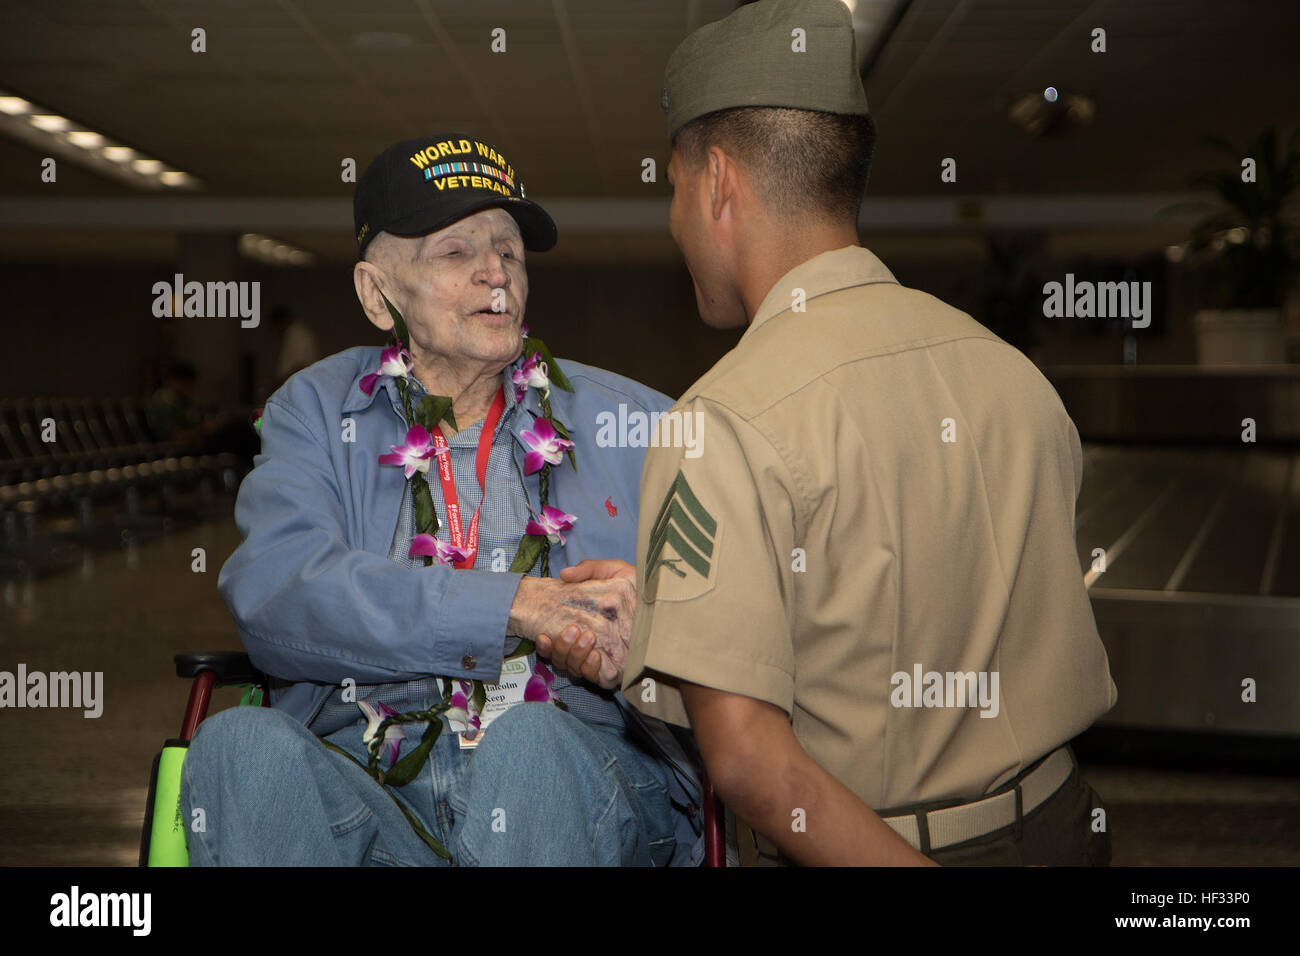 Sgt. Henry Cisneros, a Marine Corps Forces, Pacific property clerk, meets Pfc. Jimmy Keep, a World War II veteran, at the Honolulu International Airport on Oahu, Hawaii, March 17, 2015. Roughly 20 MARFORPAC Marines and a sailor thanked him for his service. Keep is on his way to Iwo Jima for the first time since fighting there as part of the 4th Marine Division 70 years ago. (U.S. Marine Corps photo by Cpl. Matthew J. Bragg) Marines greet WWII vet 150316-M-DP650-016 Stock Photo